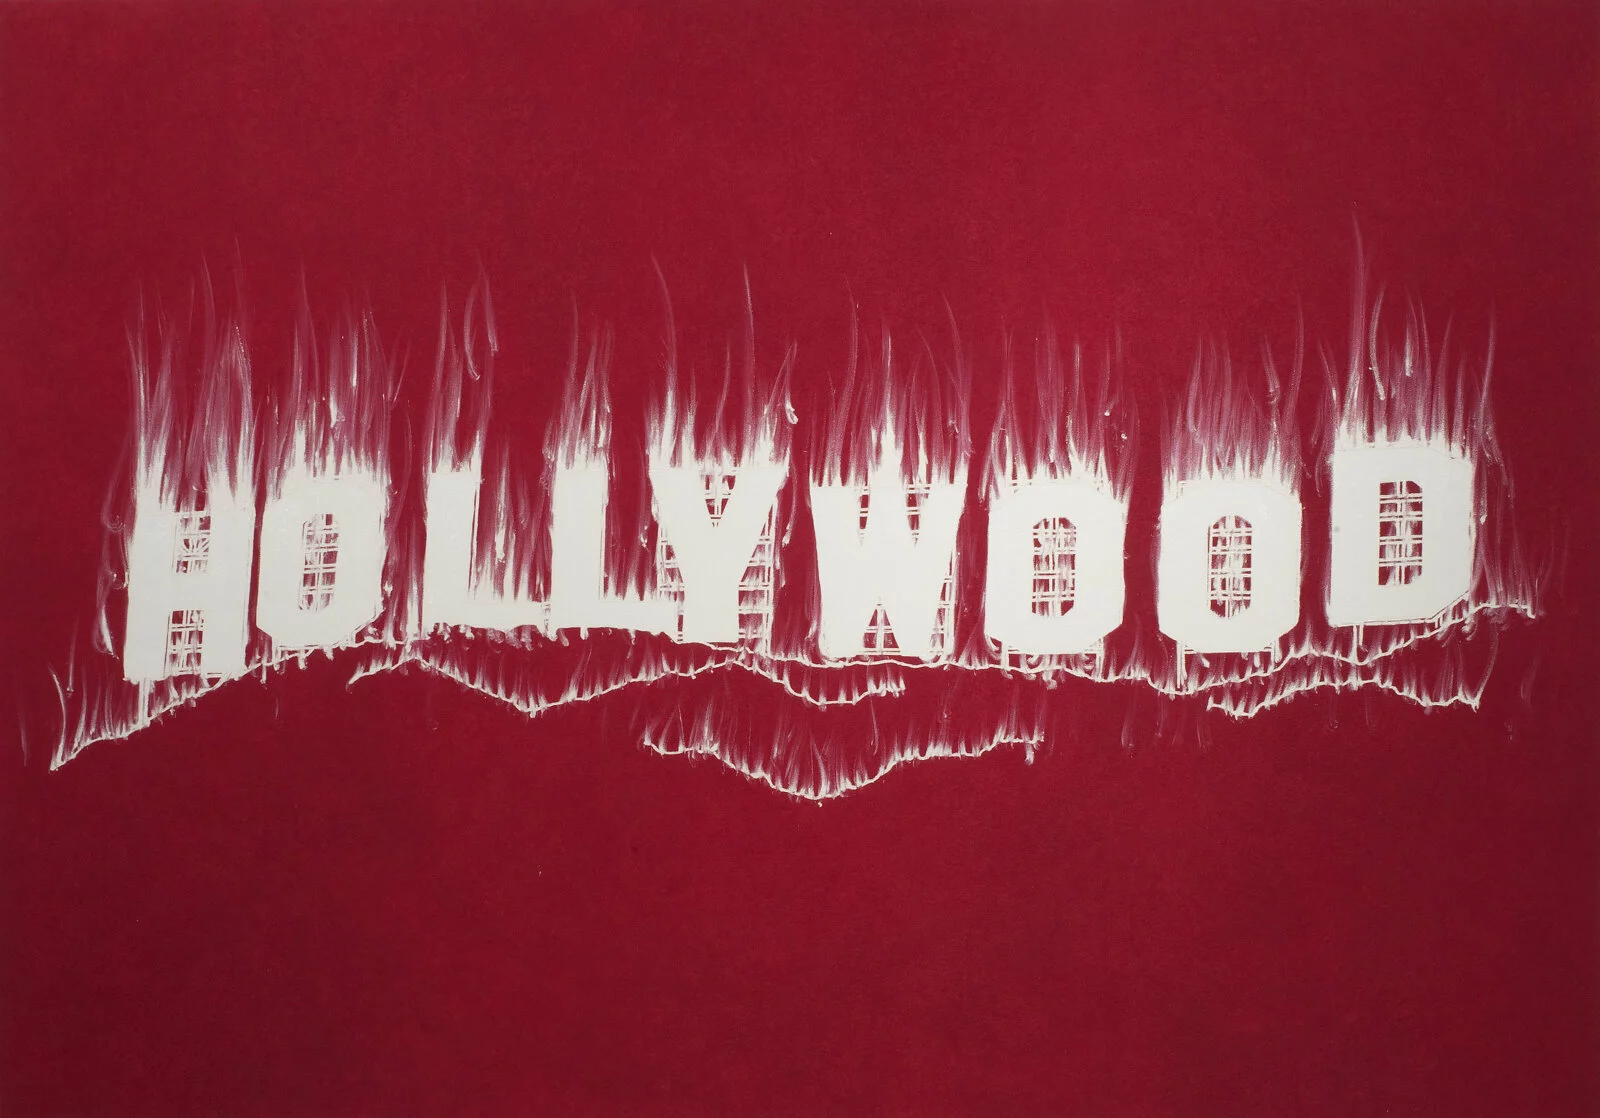 The word HOLLYWOOD is depicted on fire in white atop a line drawing of a hill against a red background.